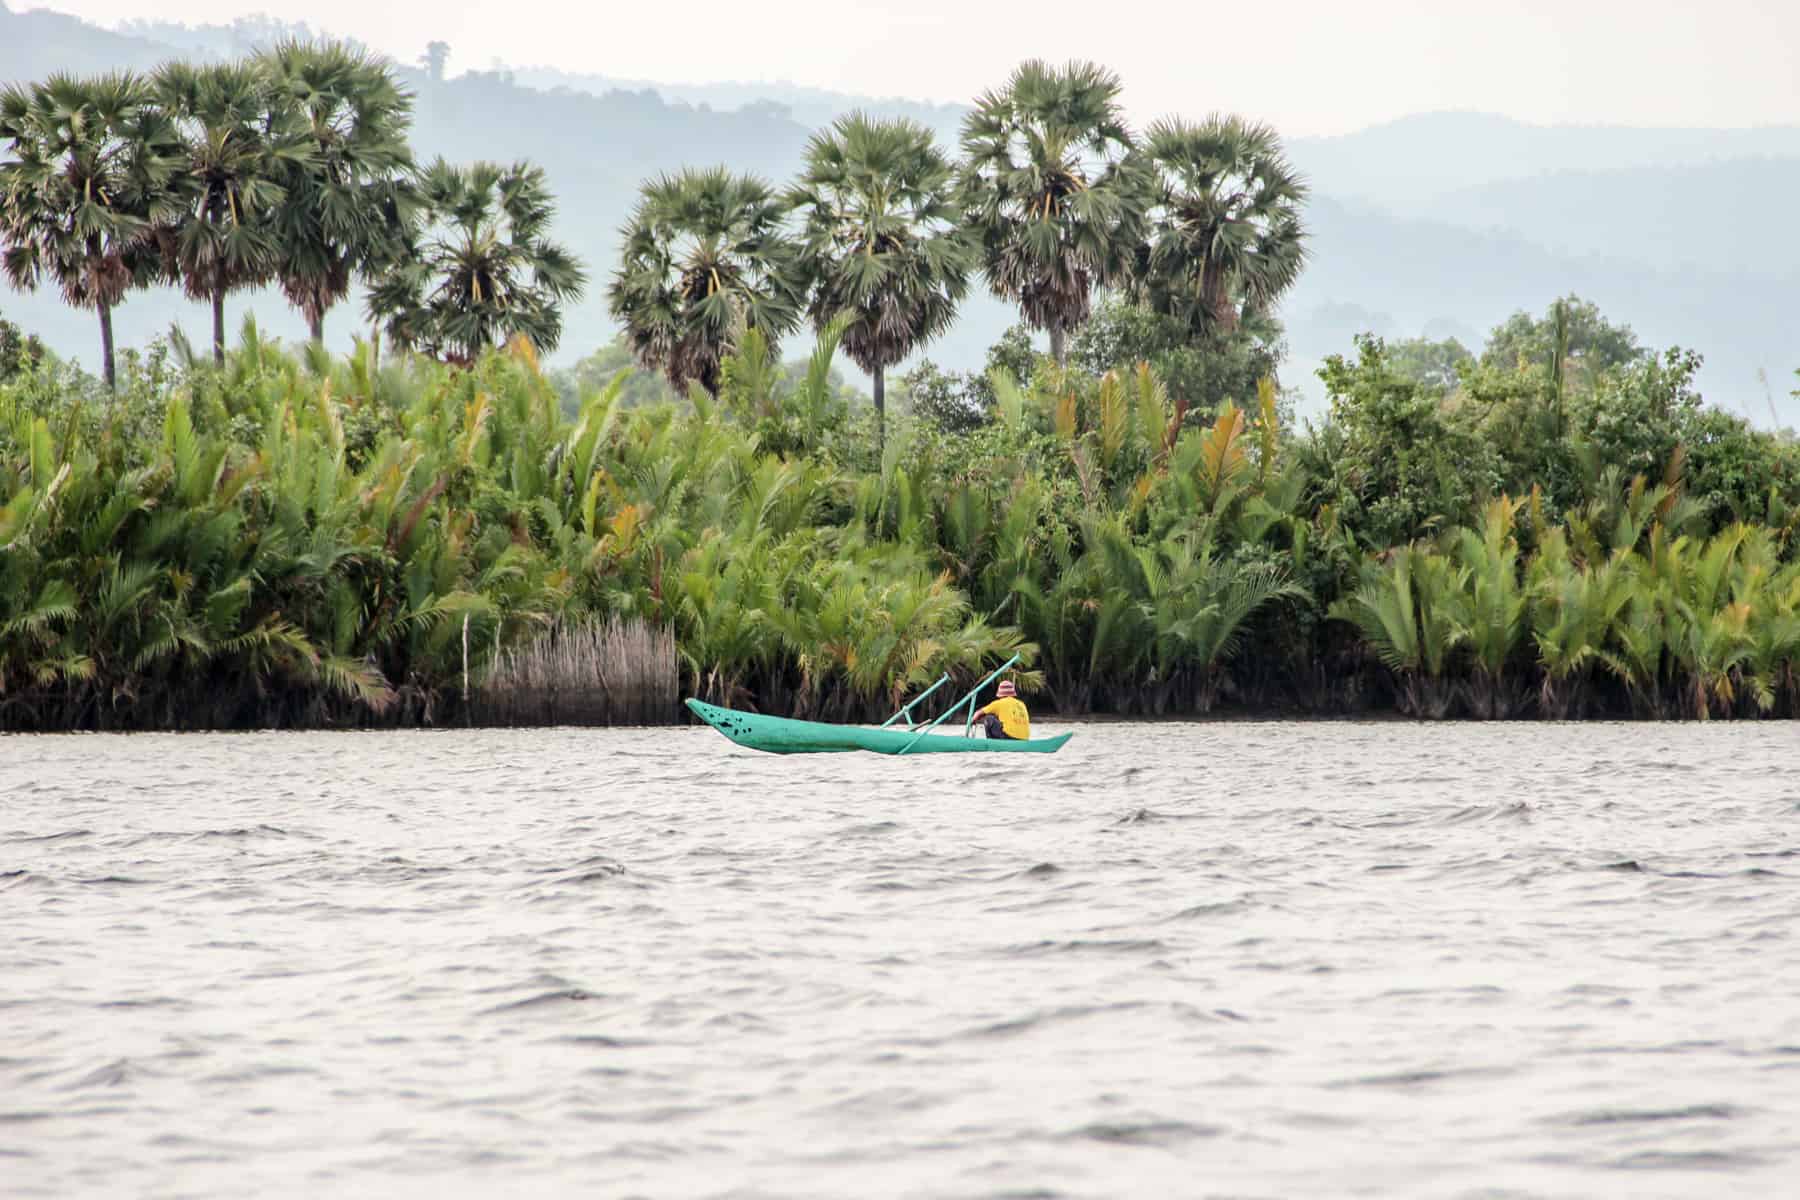 A man in a yellow t-shirt in a mint green boat floats on the river in front of lush green mangroves, tall palm trees and the silhouette of mountains. 